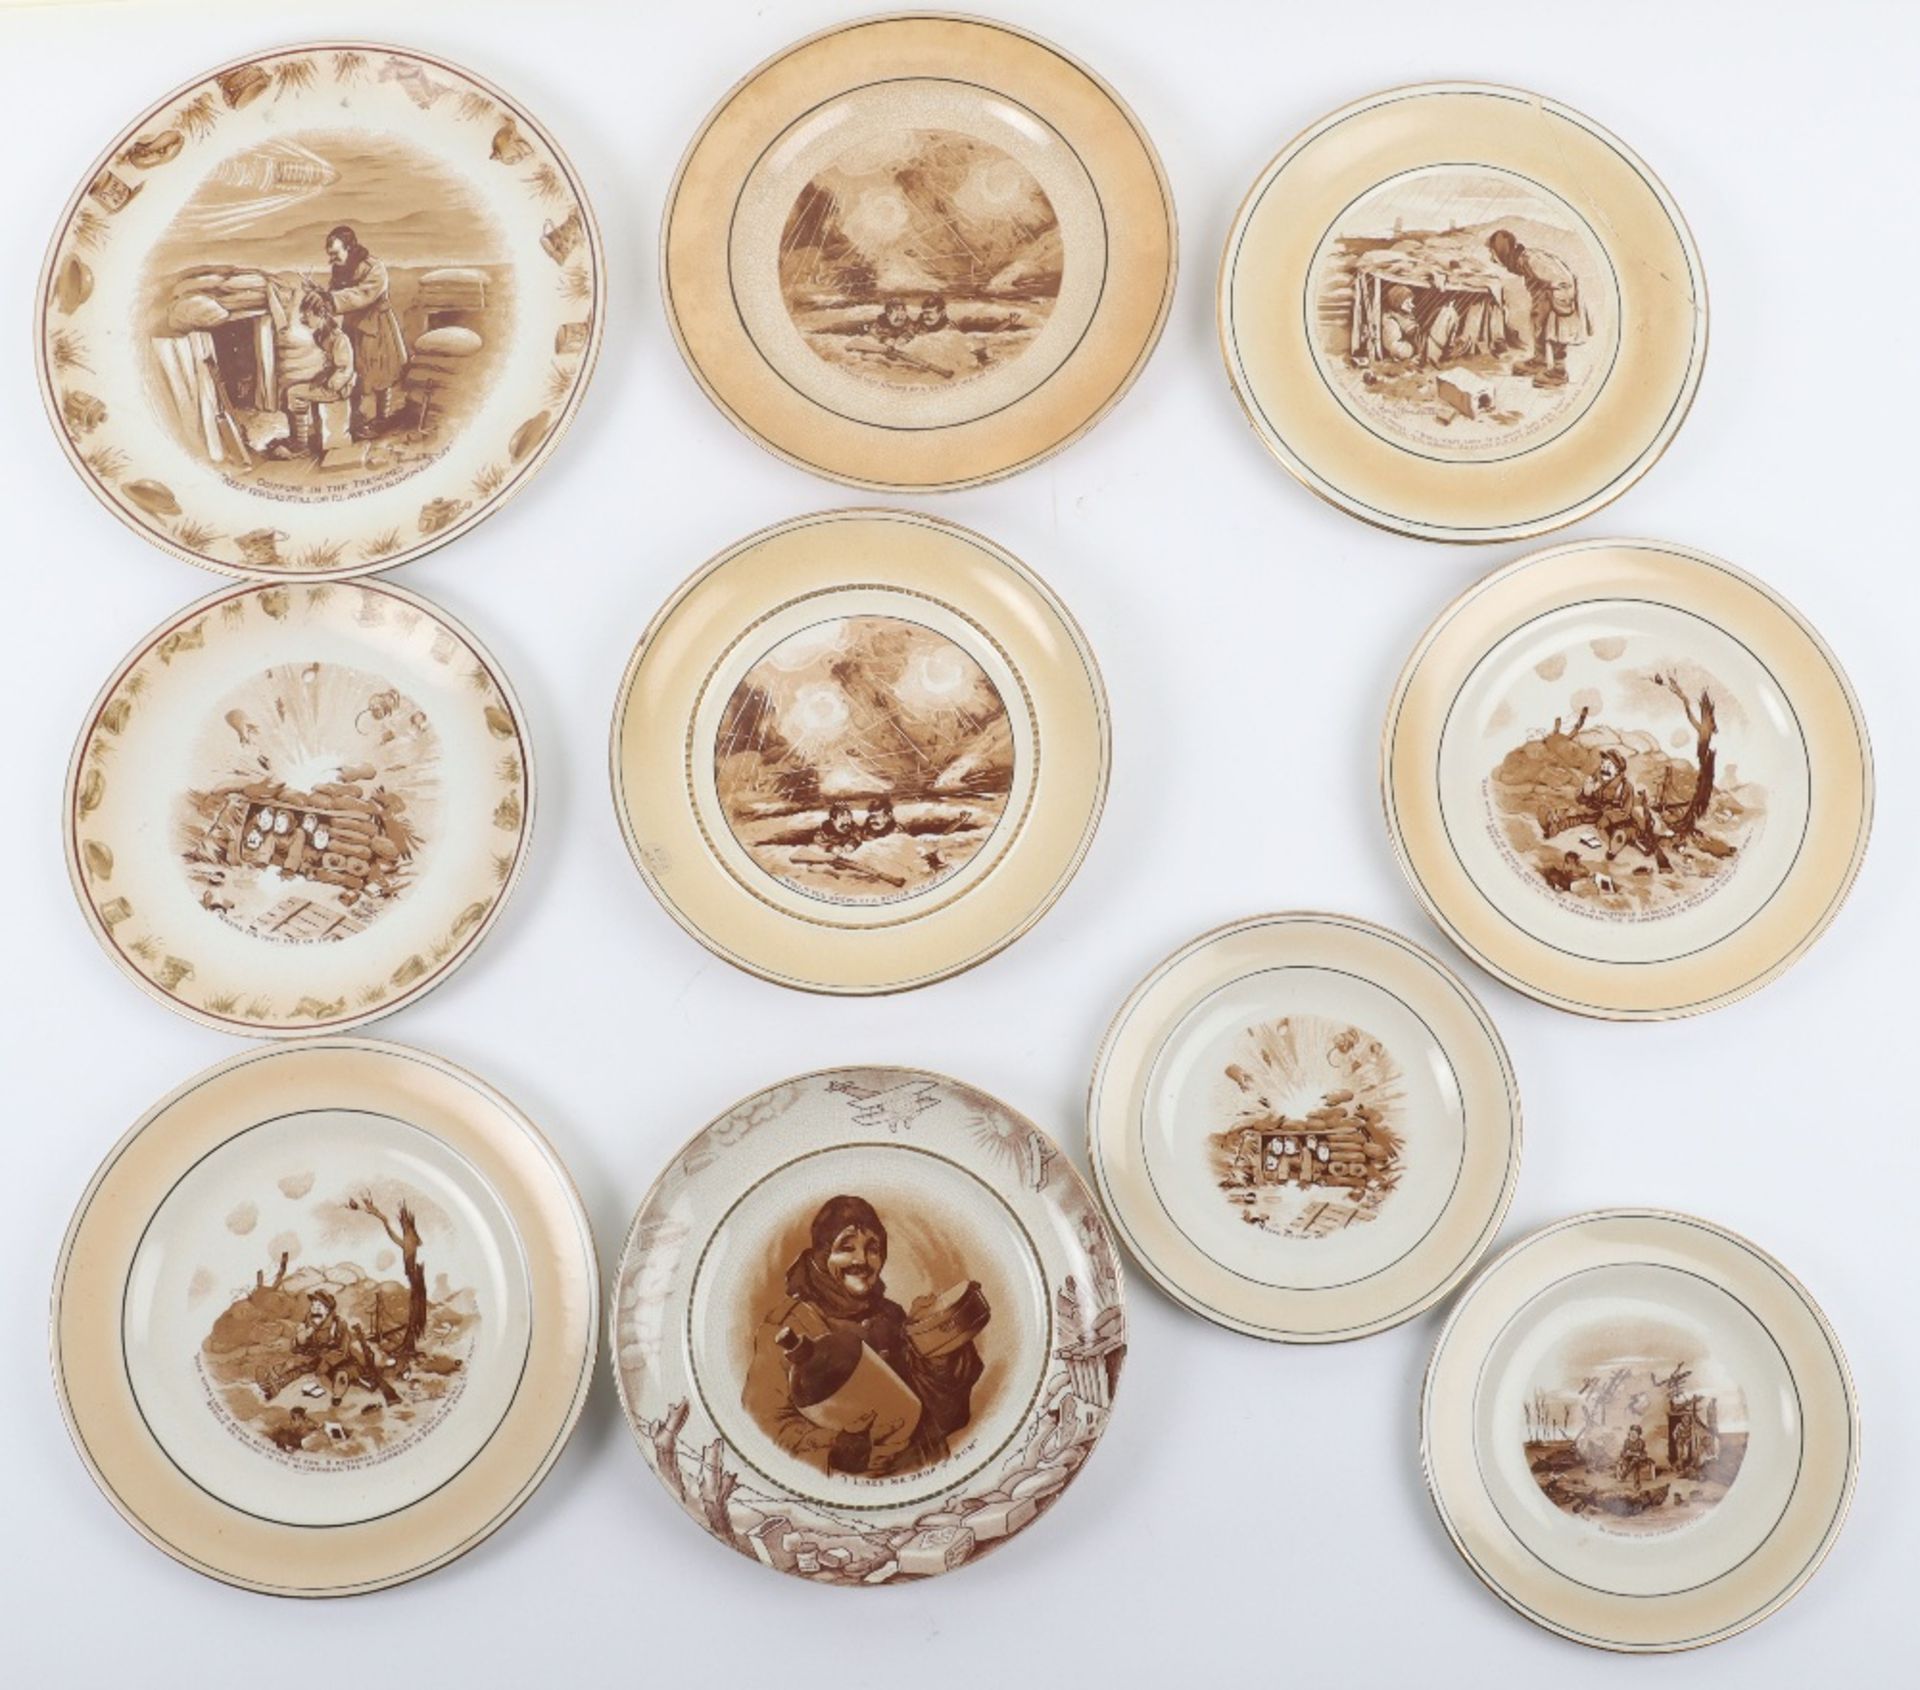 A Selection of Bruce Bairnsfather ‘Old Bill’ Plates and Bowls